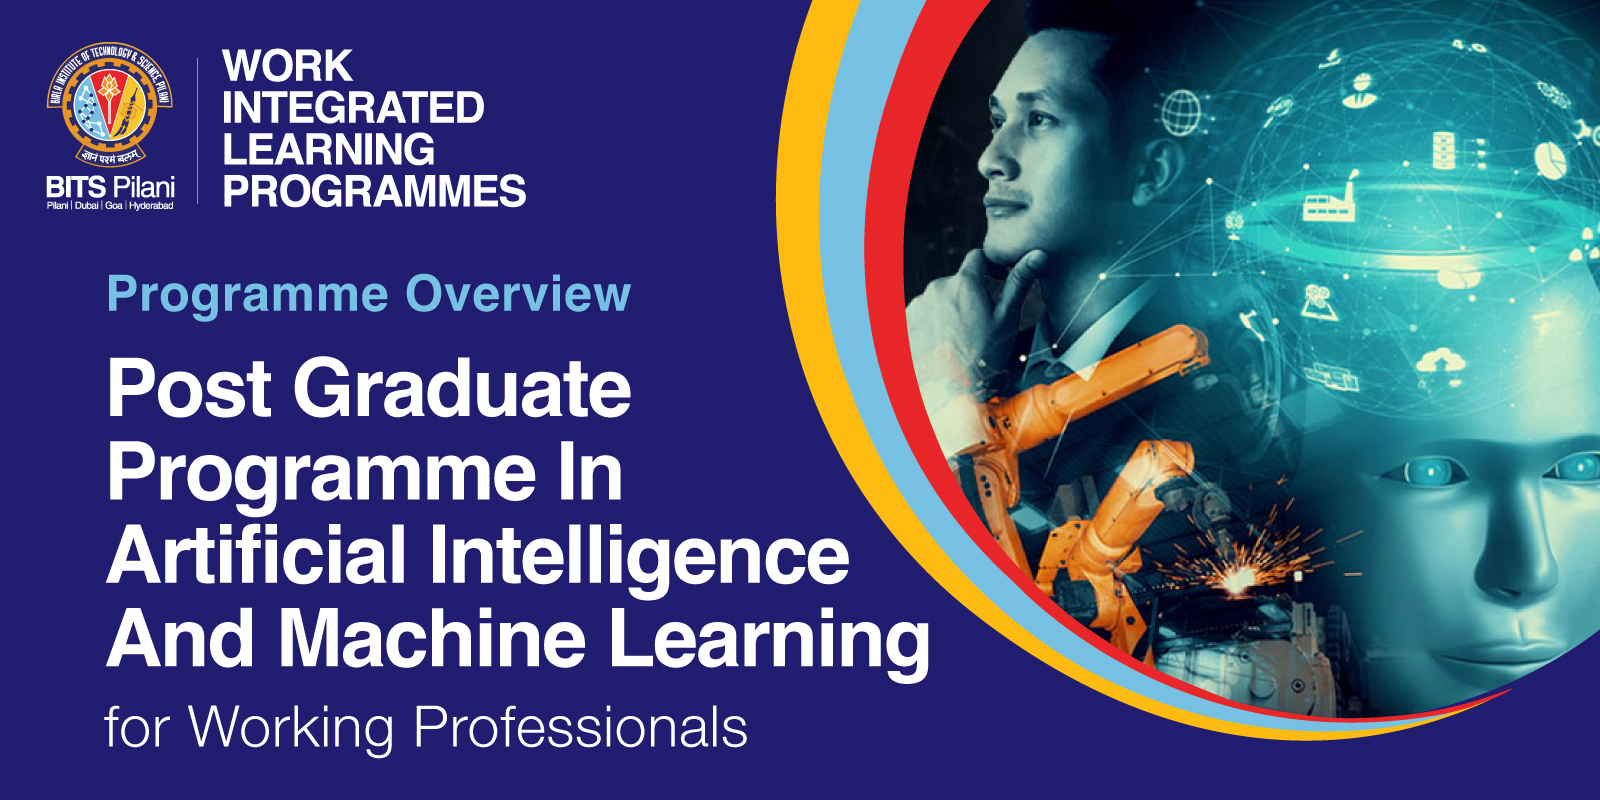 Post Graduate Programme In Artificial Intelligence And Machine Learning Video